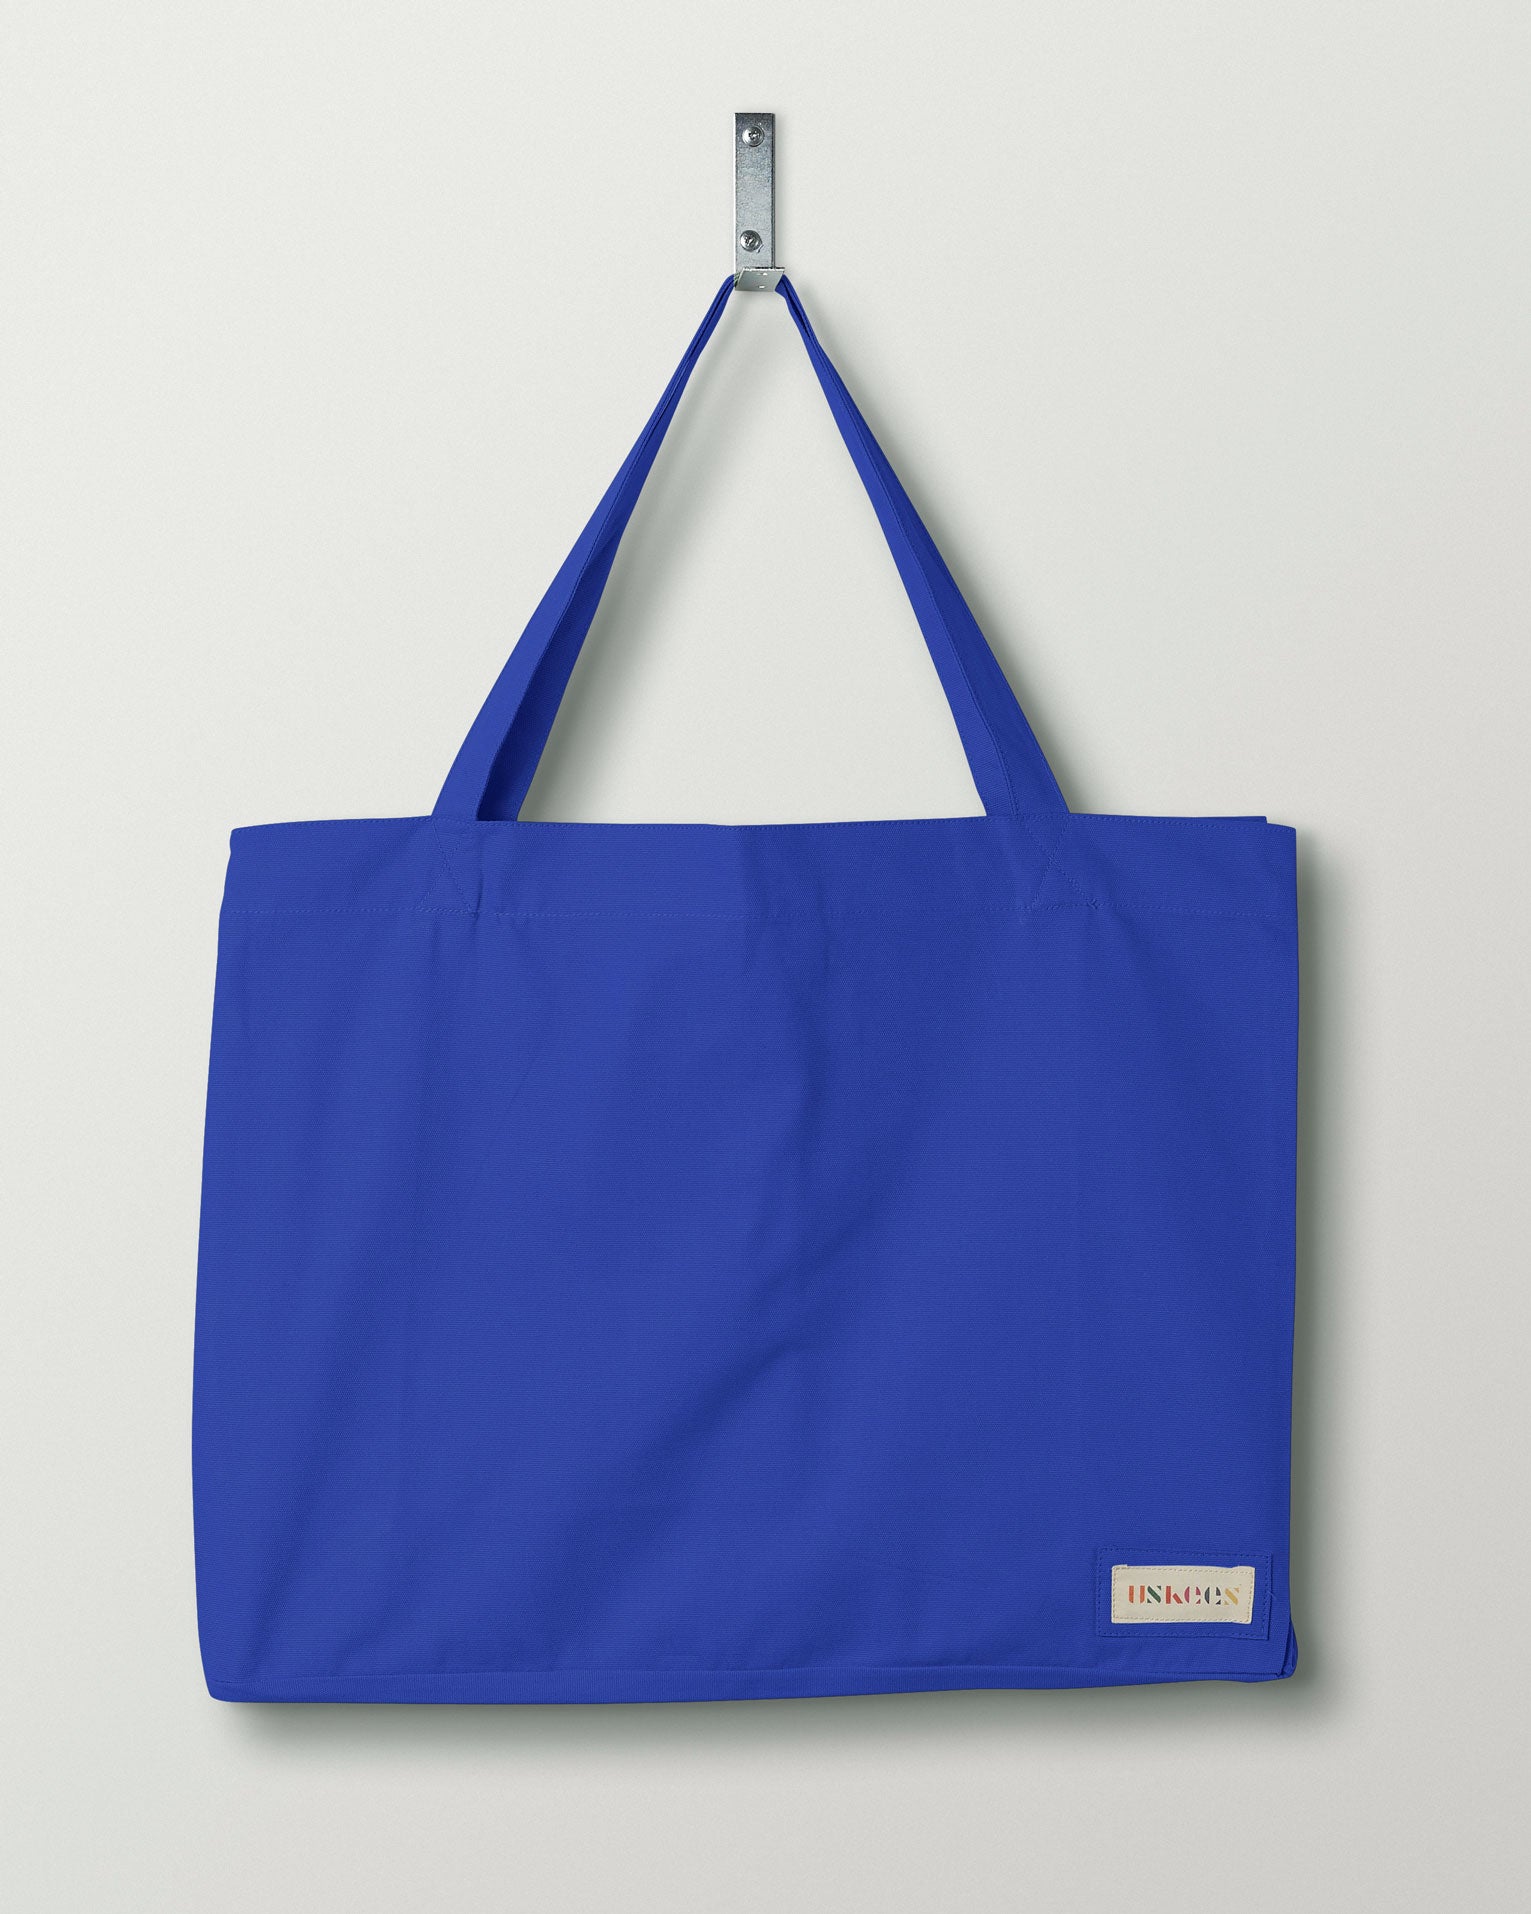 Full front hanging shot of Uskees #4001 large ultra-blue tote bag, showing double handles and Uskees woven logo.